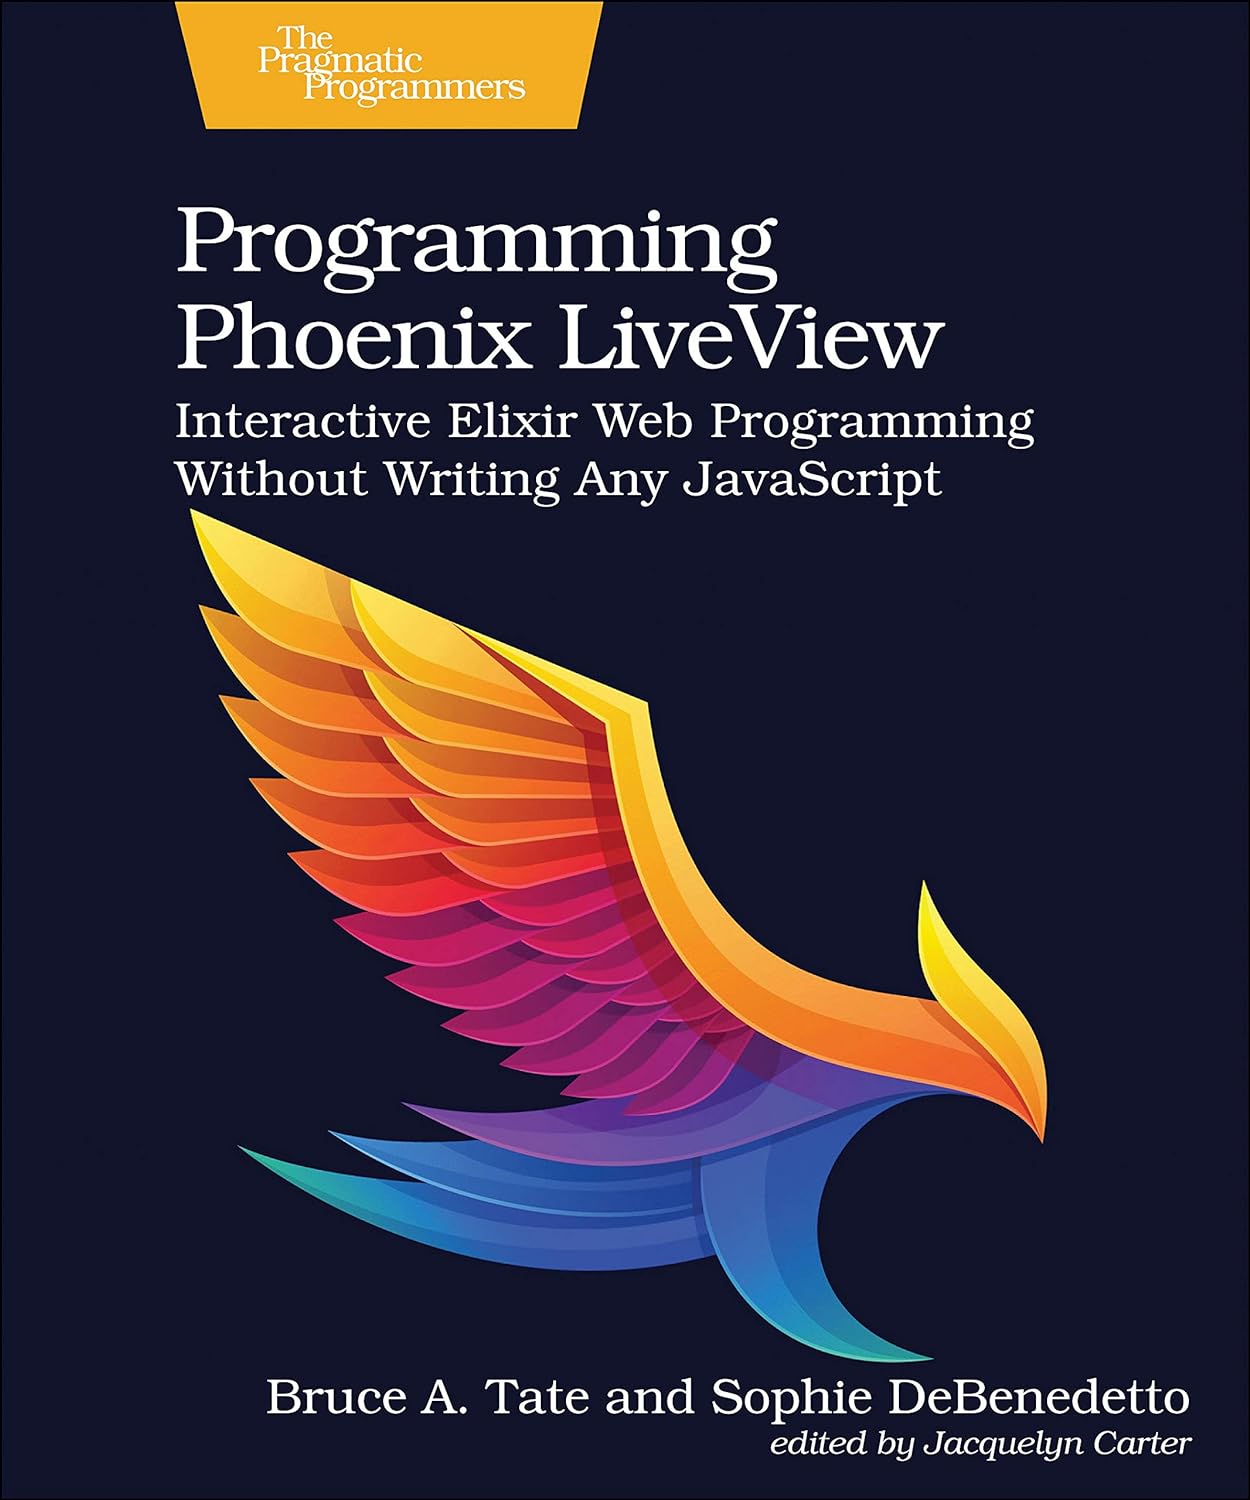 Programming Phoenix LiveView: Interactive Elixir Web Programming Without Writing Any JavaScript by Bruce Tate